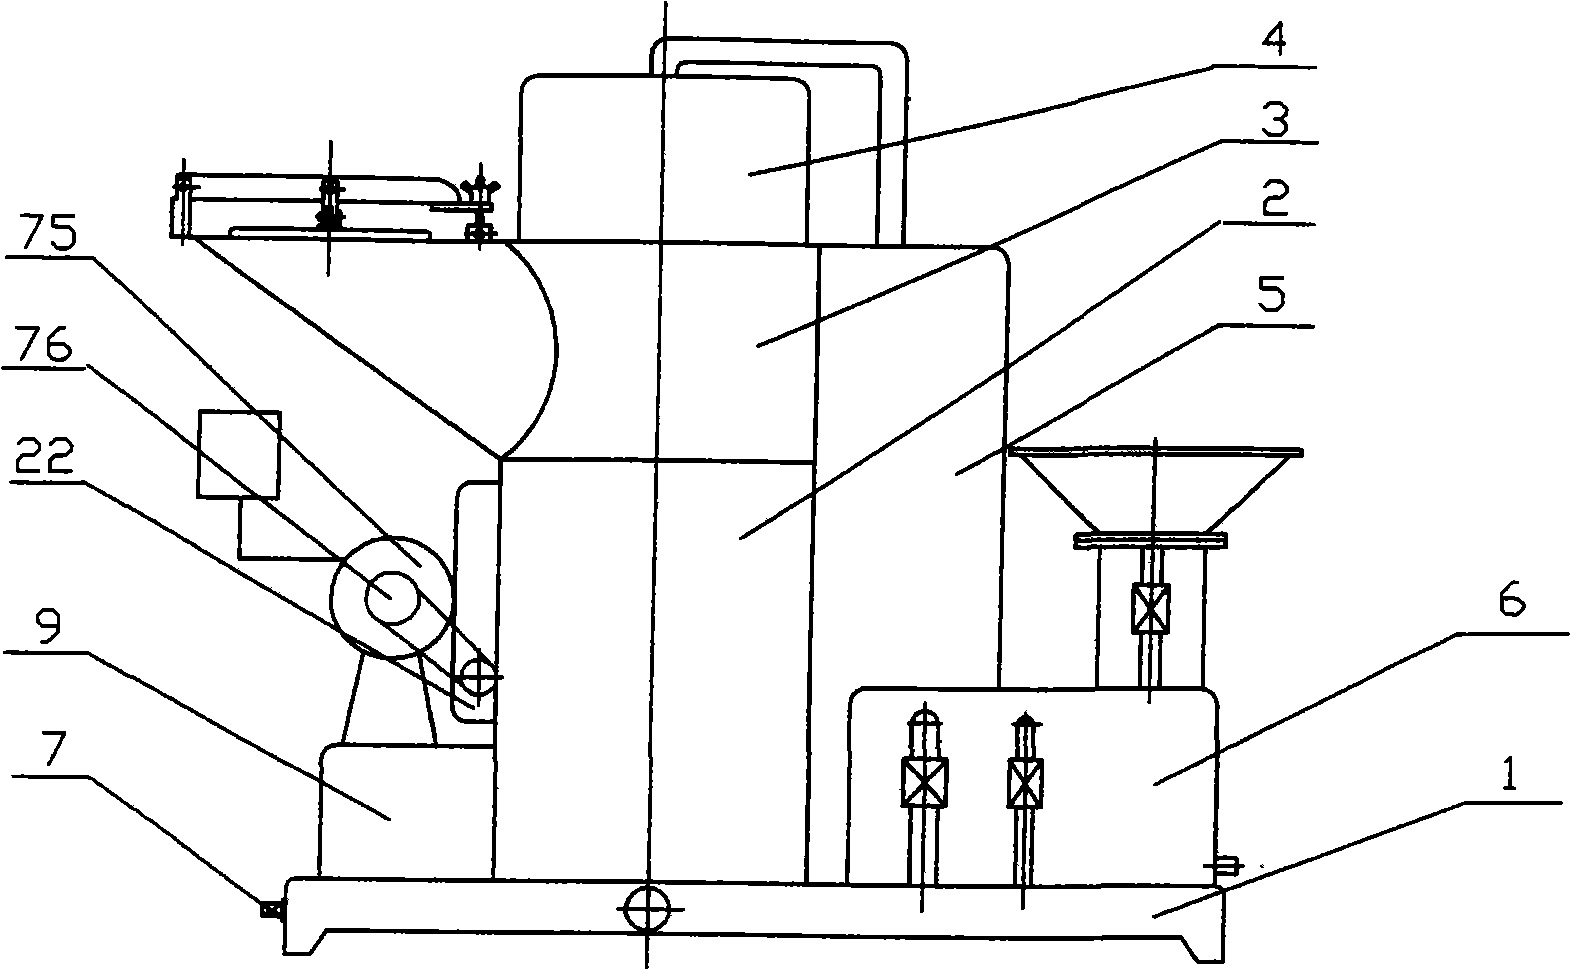 Process and apparatus for producing biomass gas